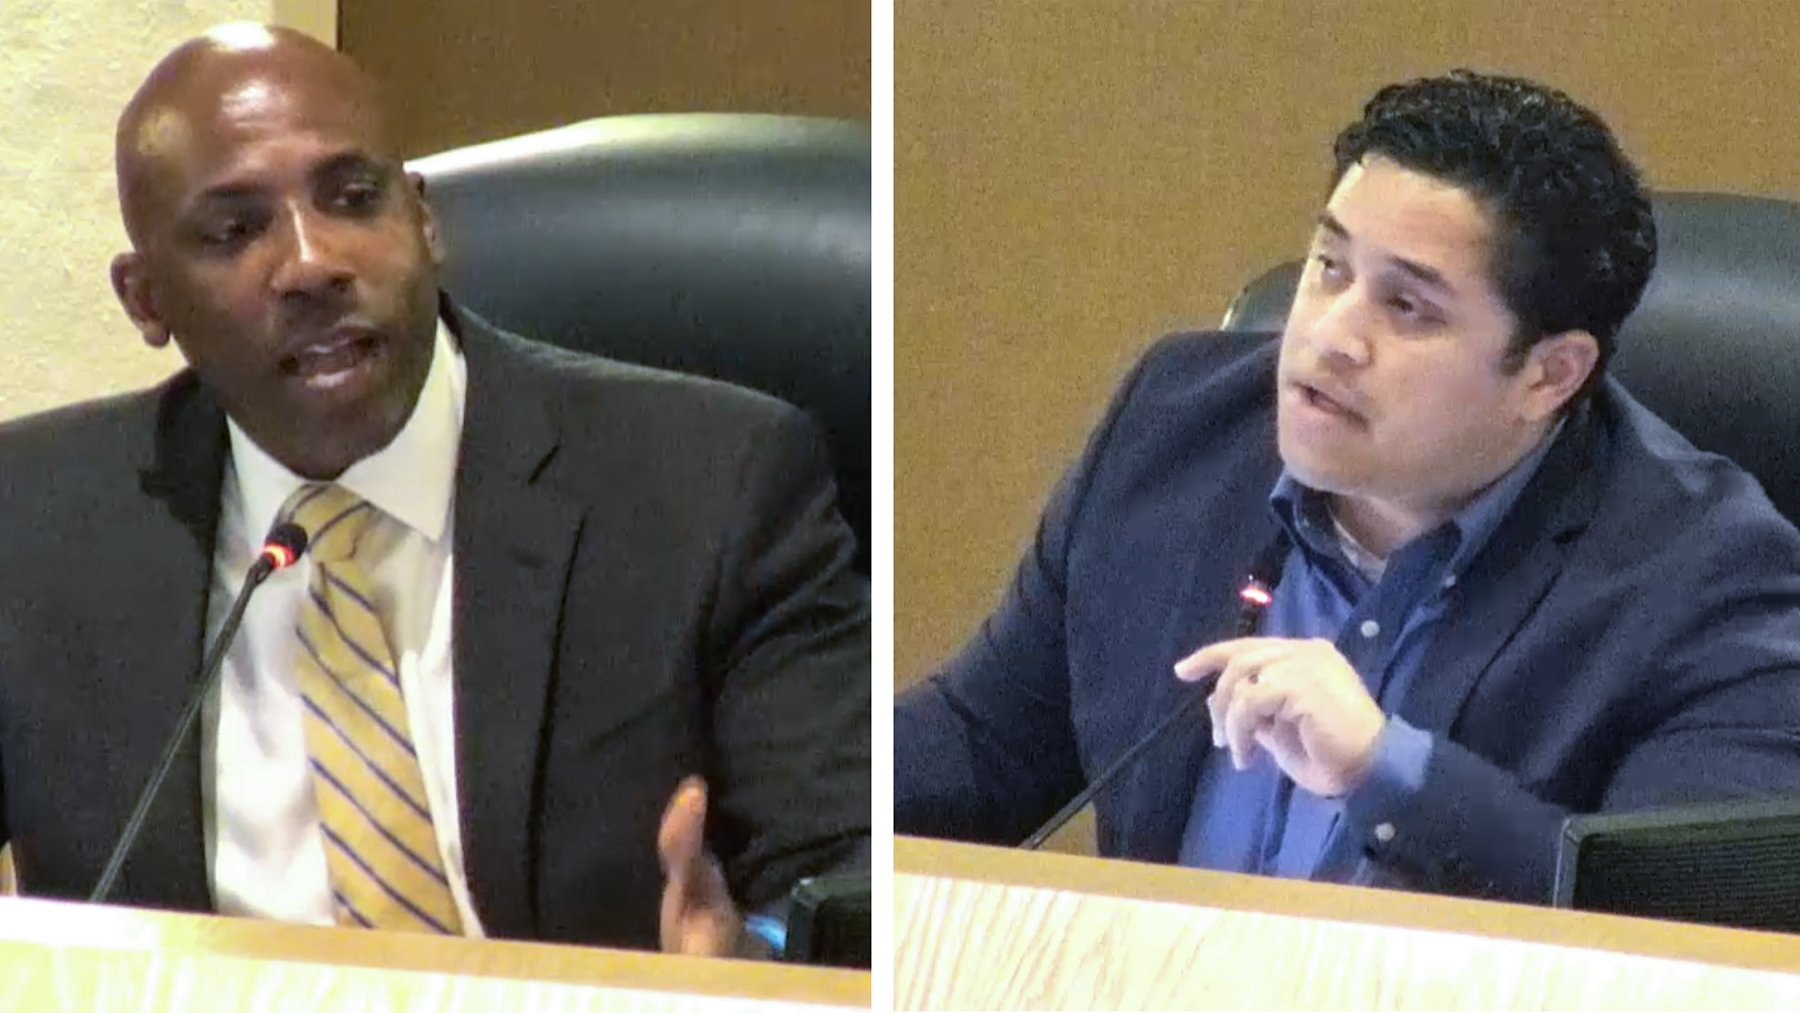 Chaos and Contradictions at the Tamarac City Commission Meeting